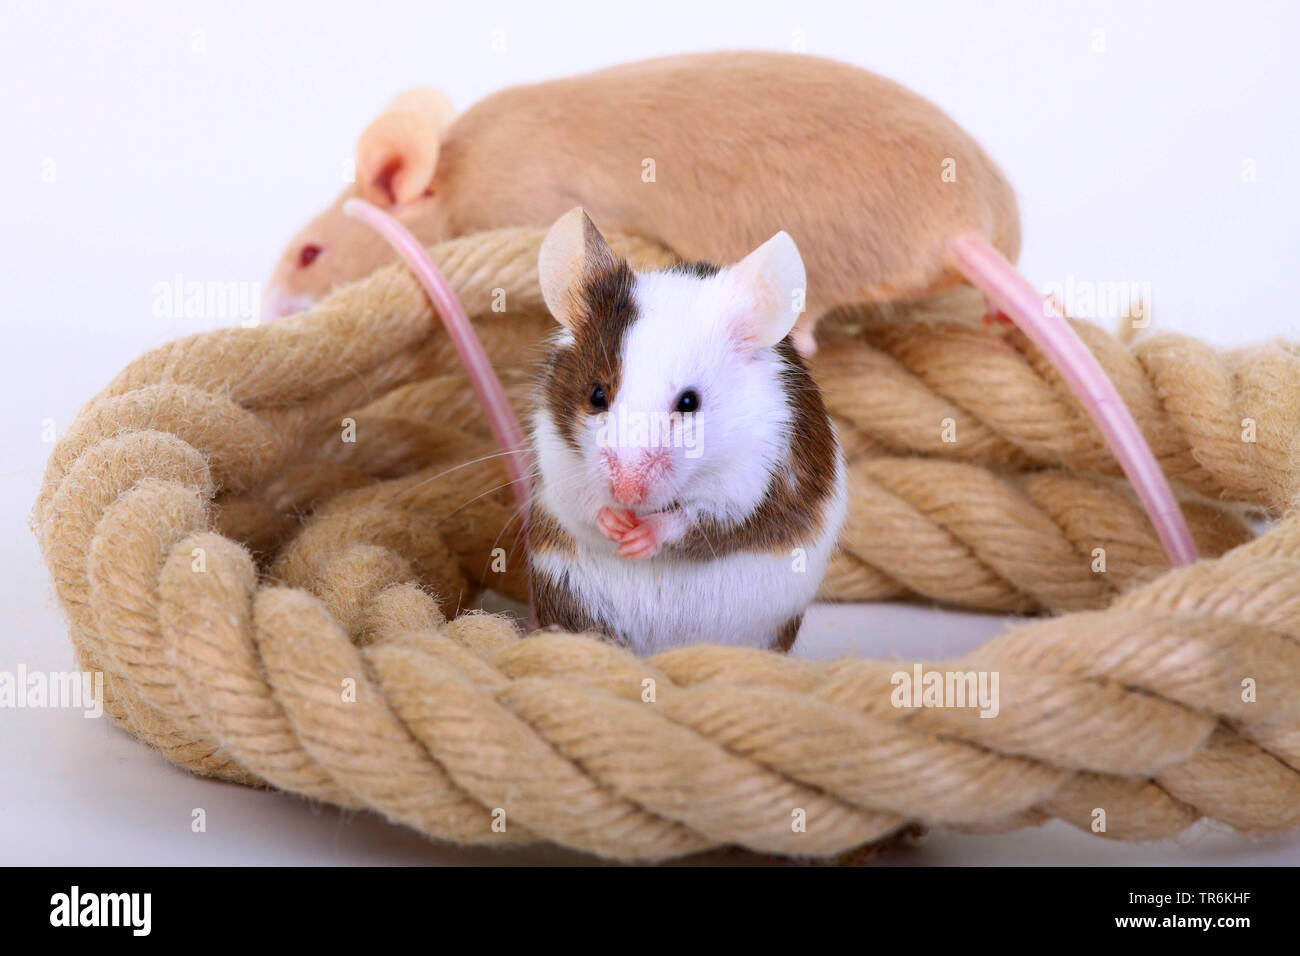 fancy mouse (Mus musculus), two fancy mice with rope, Germany Stock Photo